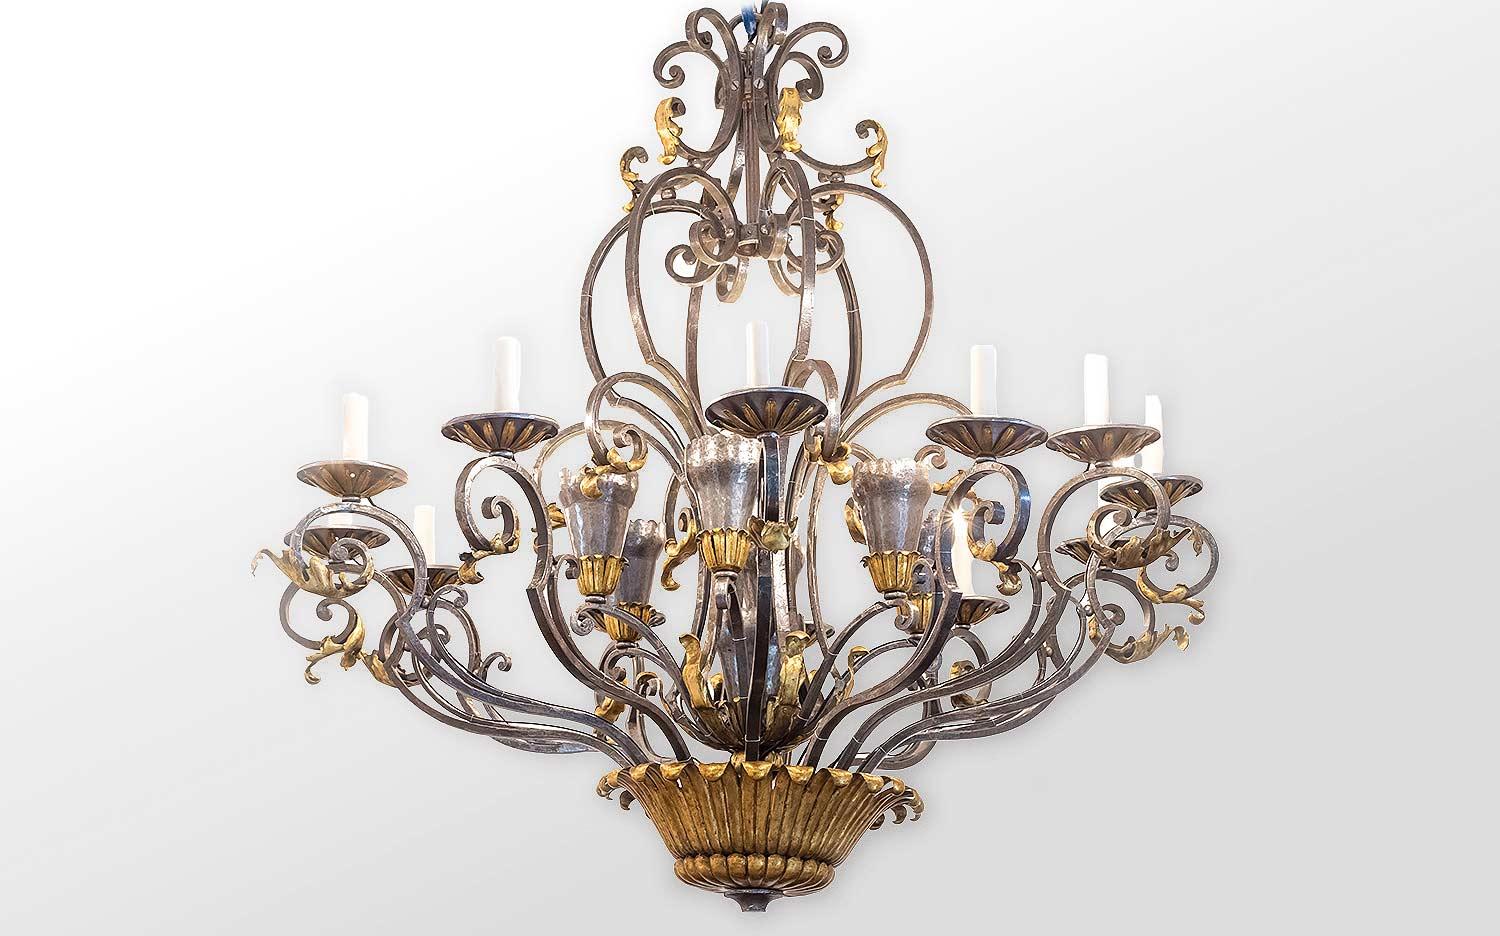 Gilbert Poillerat (in the style of). Wrought iron cage chandelier with 12 arm lights standing on a main cup adorned with waterleaves and gadroons. Candle crowns are also cup shaped, equally decorated with water leaves and the whole ensemble is